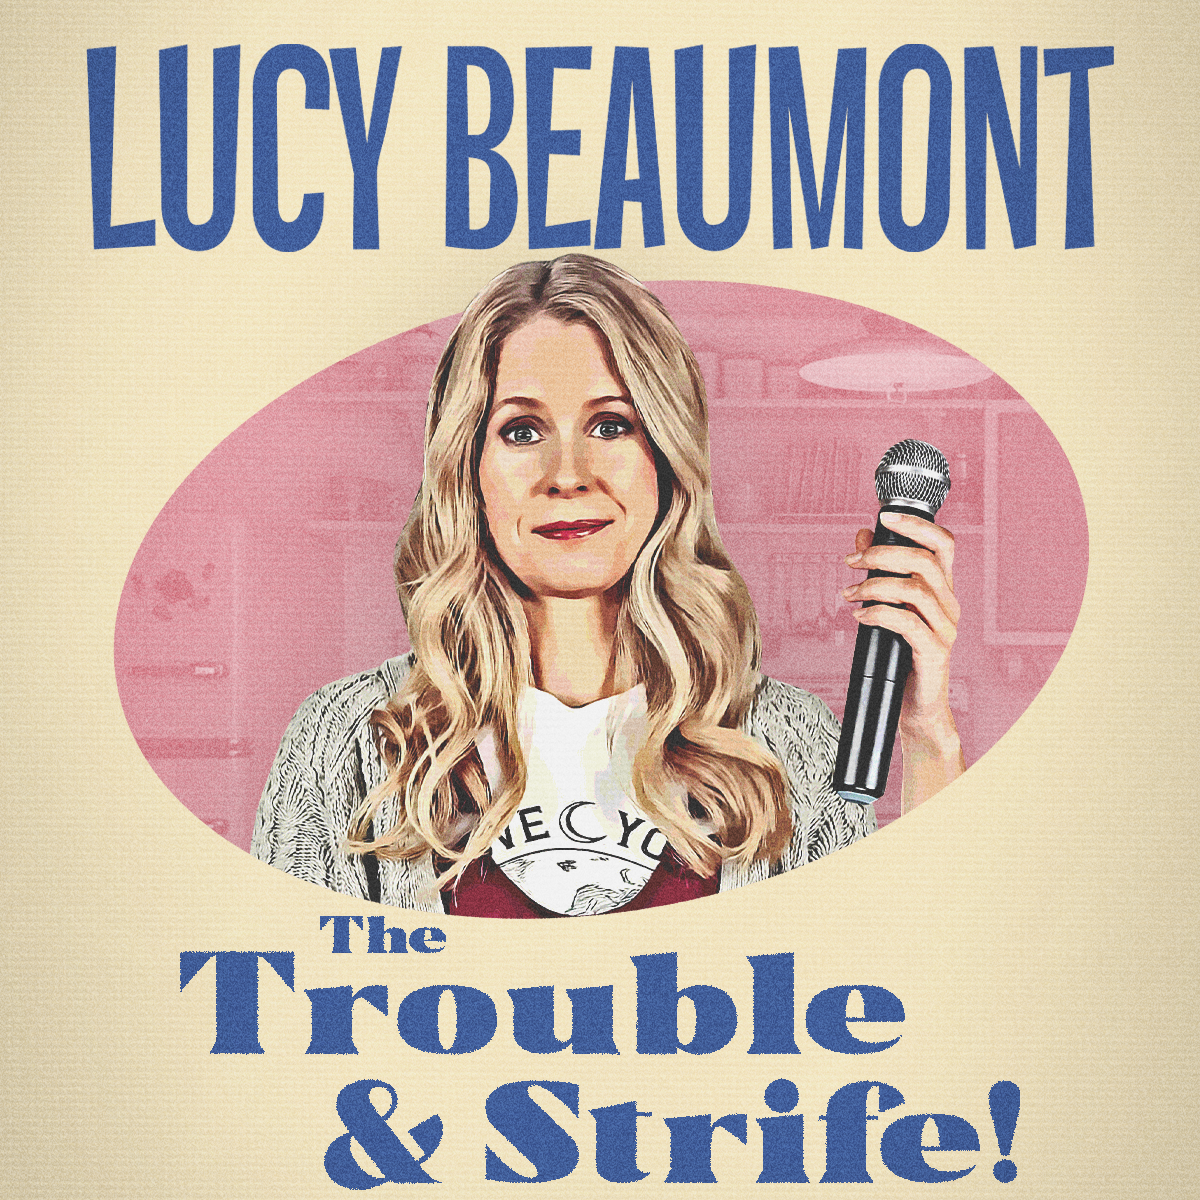 Lucy Beaumont appearing at the Victoria Theatre Halifax with The Trouble and Strife